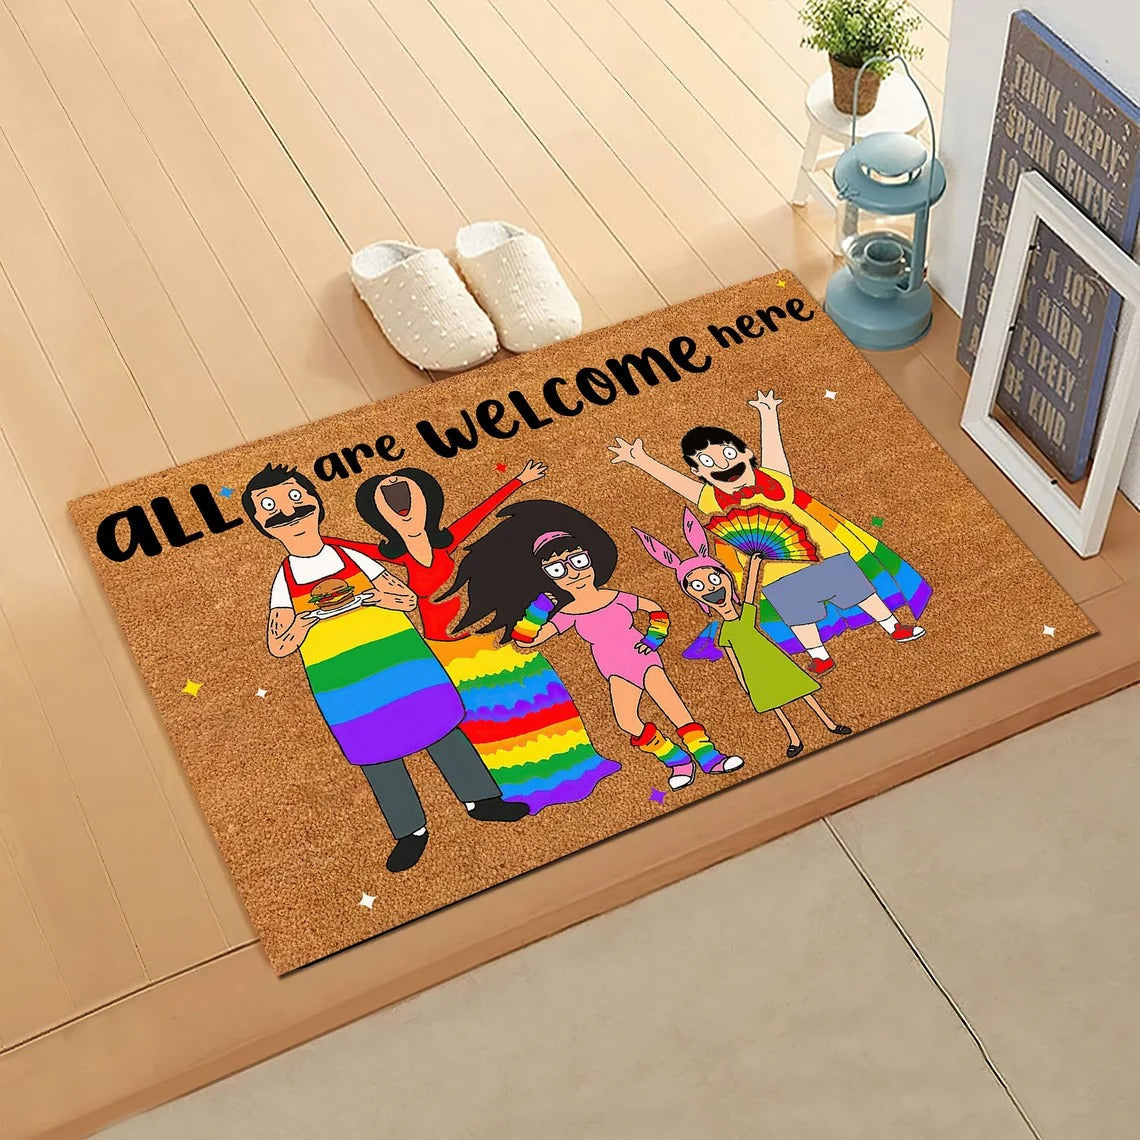 Pride Doormat Lgbt All Are Welcome Here Doormat/ Lgbt Gay Pride Home Decor/ Lgbt Family Welcome Doormat